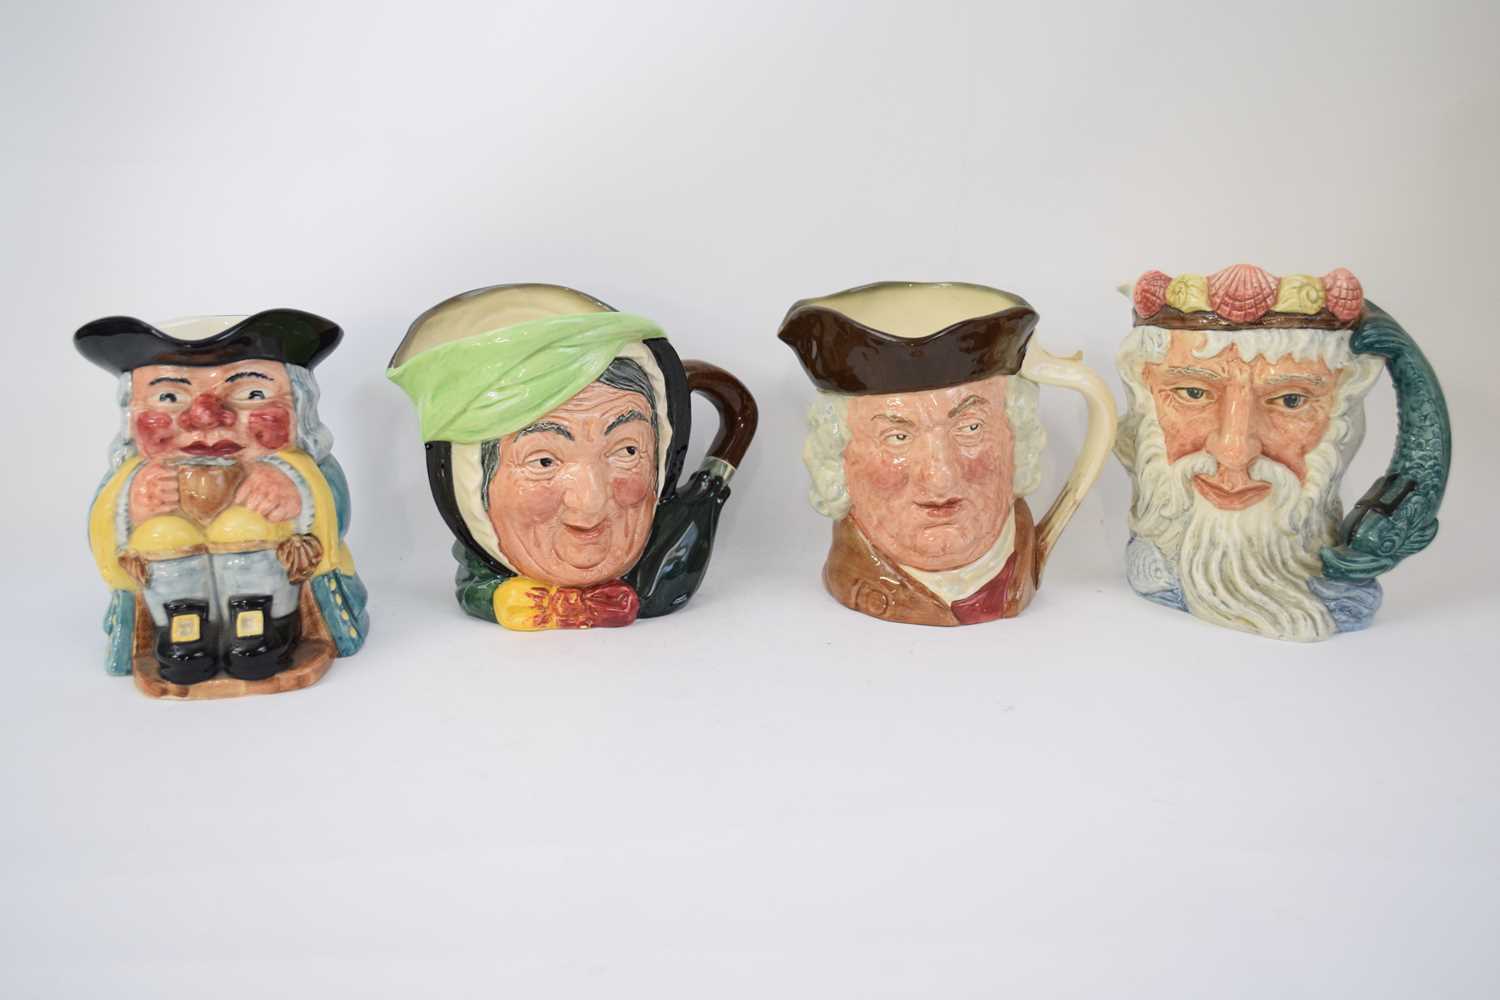 Group of character jugs, Royal Doulton Sari Gamp, Sam Johnson, Neptune and a Clarice Cliff - Image 2 of 4